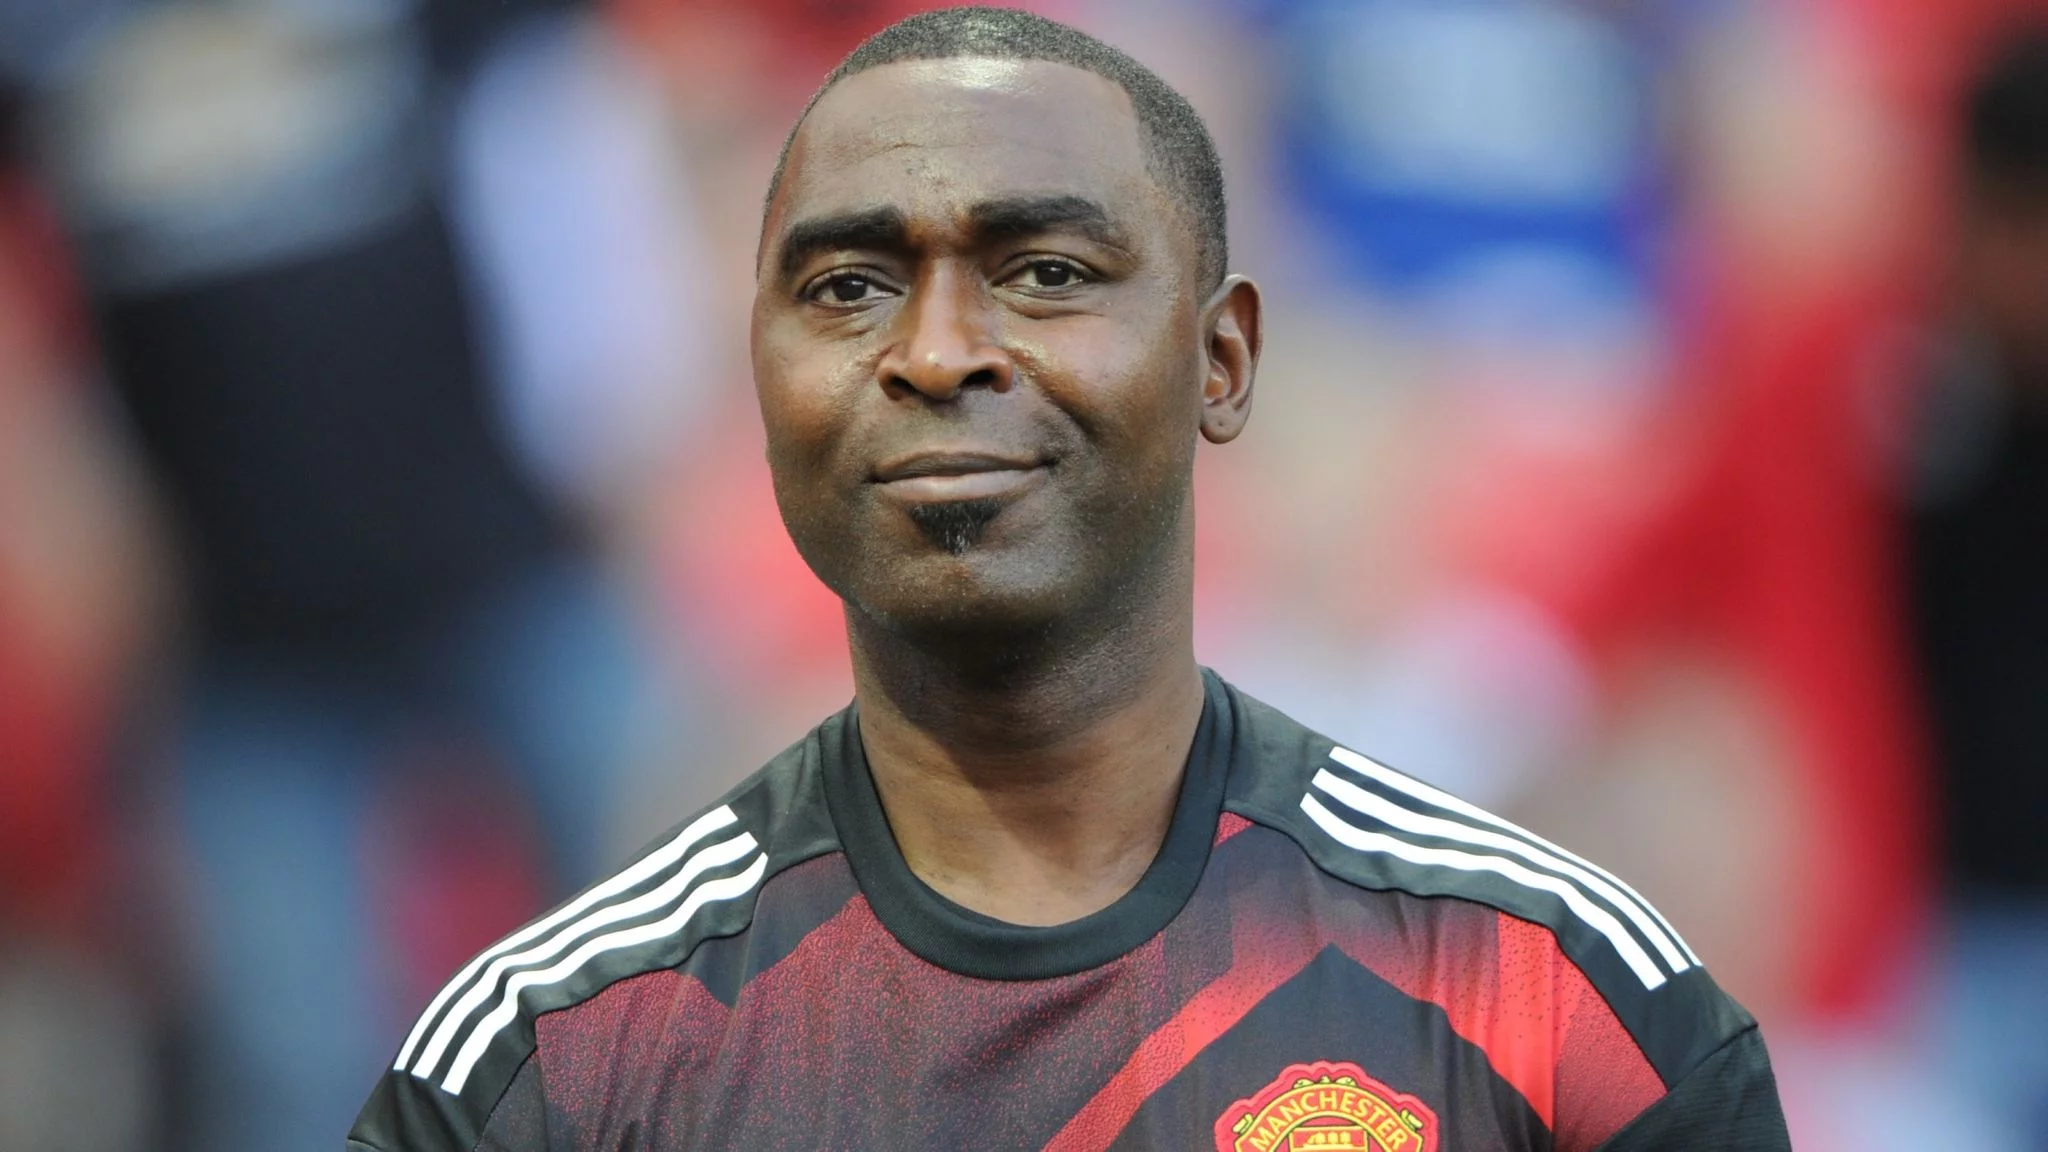 EPL: ‘We used to laugh at Arsenal’ – Andy Cole reflects on Man Utd’s decline